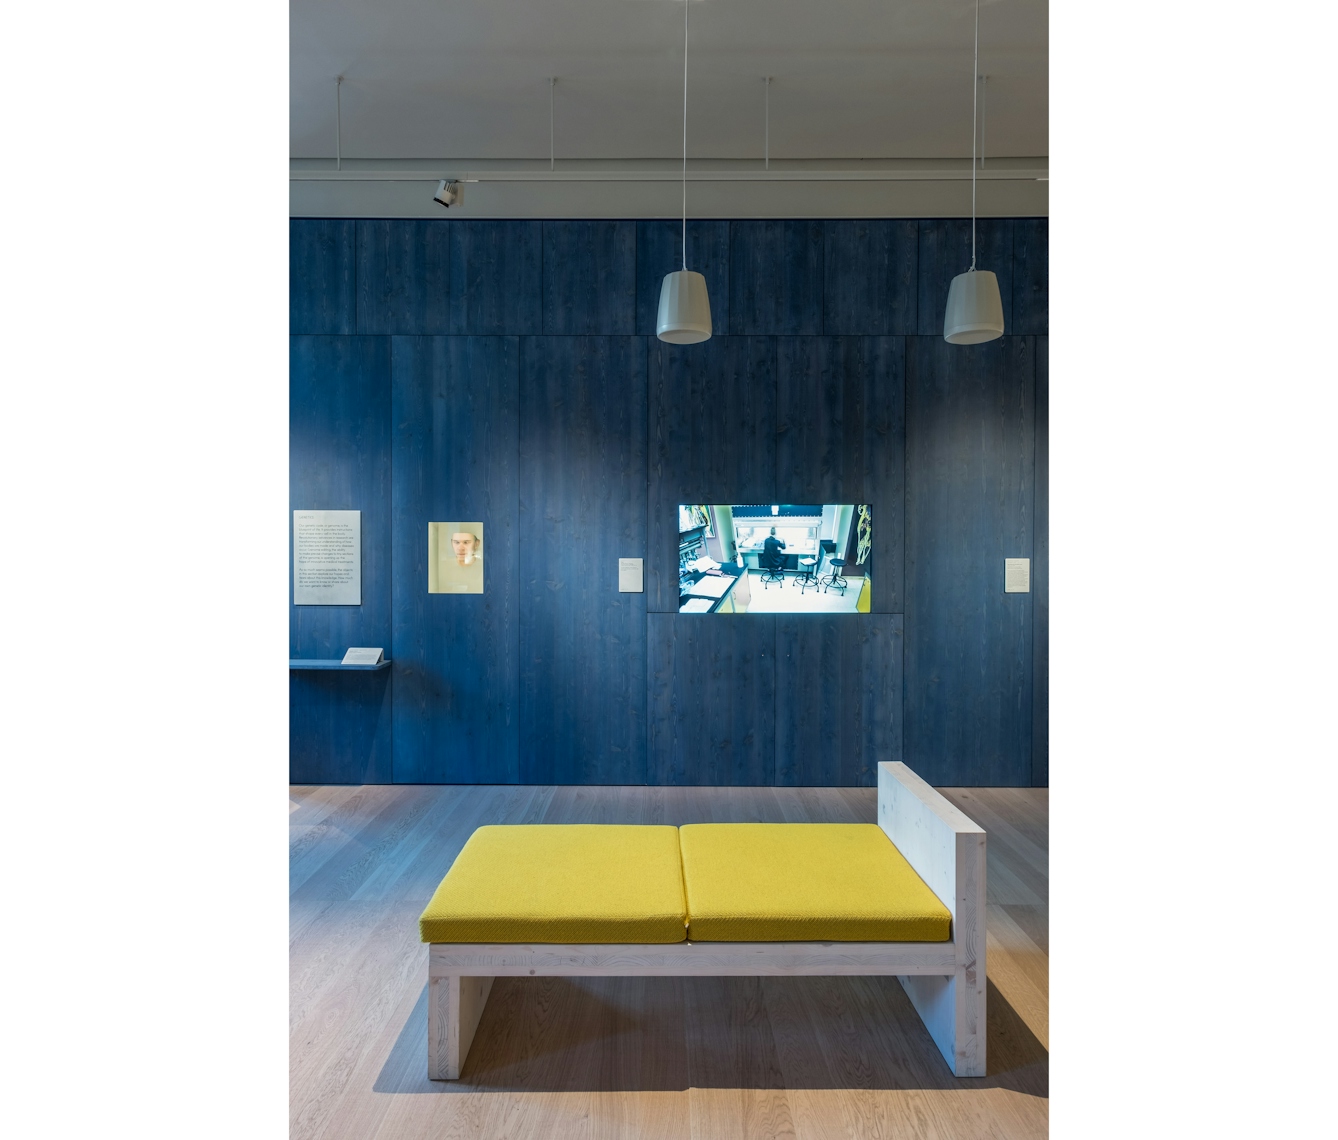 A photograph showing a wooden bench with yellow cushions in front of a large tv screen embedded in a dark blue wood panelled wall with two speakers hanging on long cords from the ceiling.